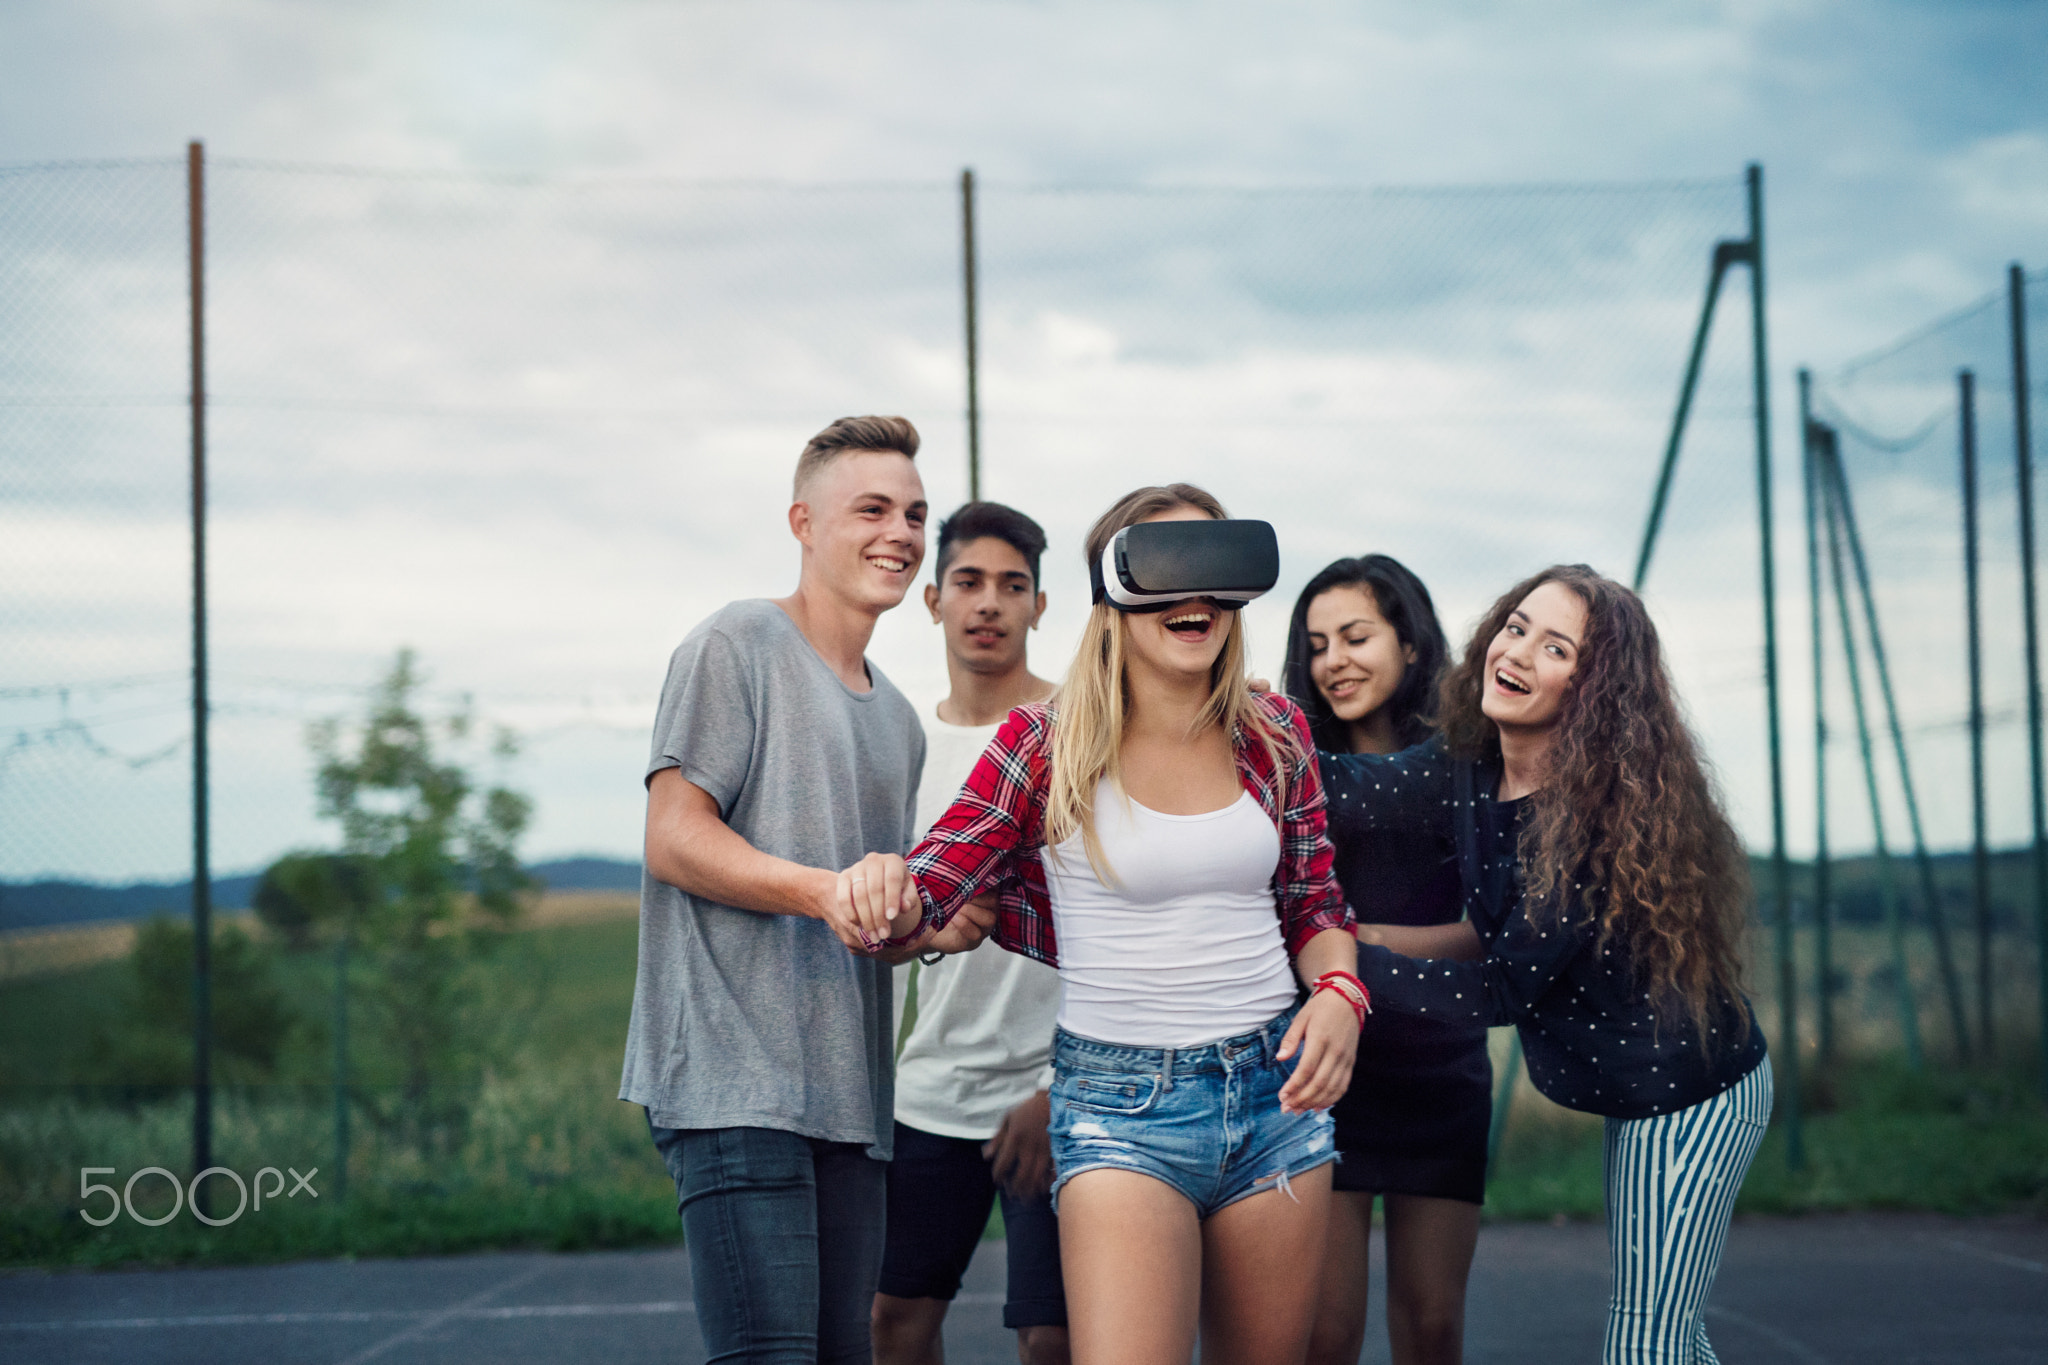 Attractive teenagers on playground. Girl with VR glasses.